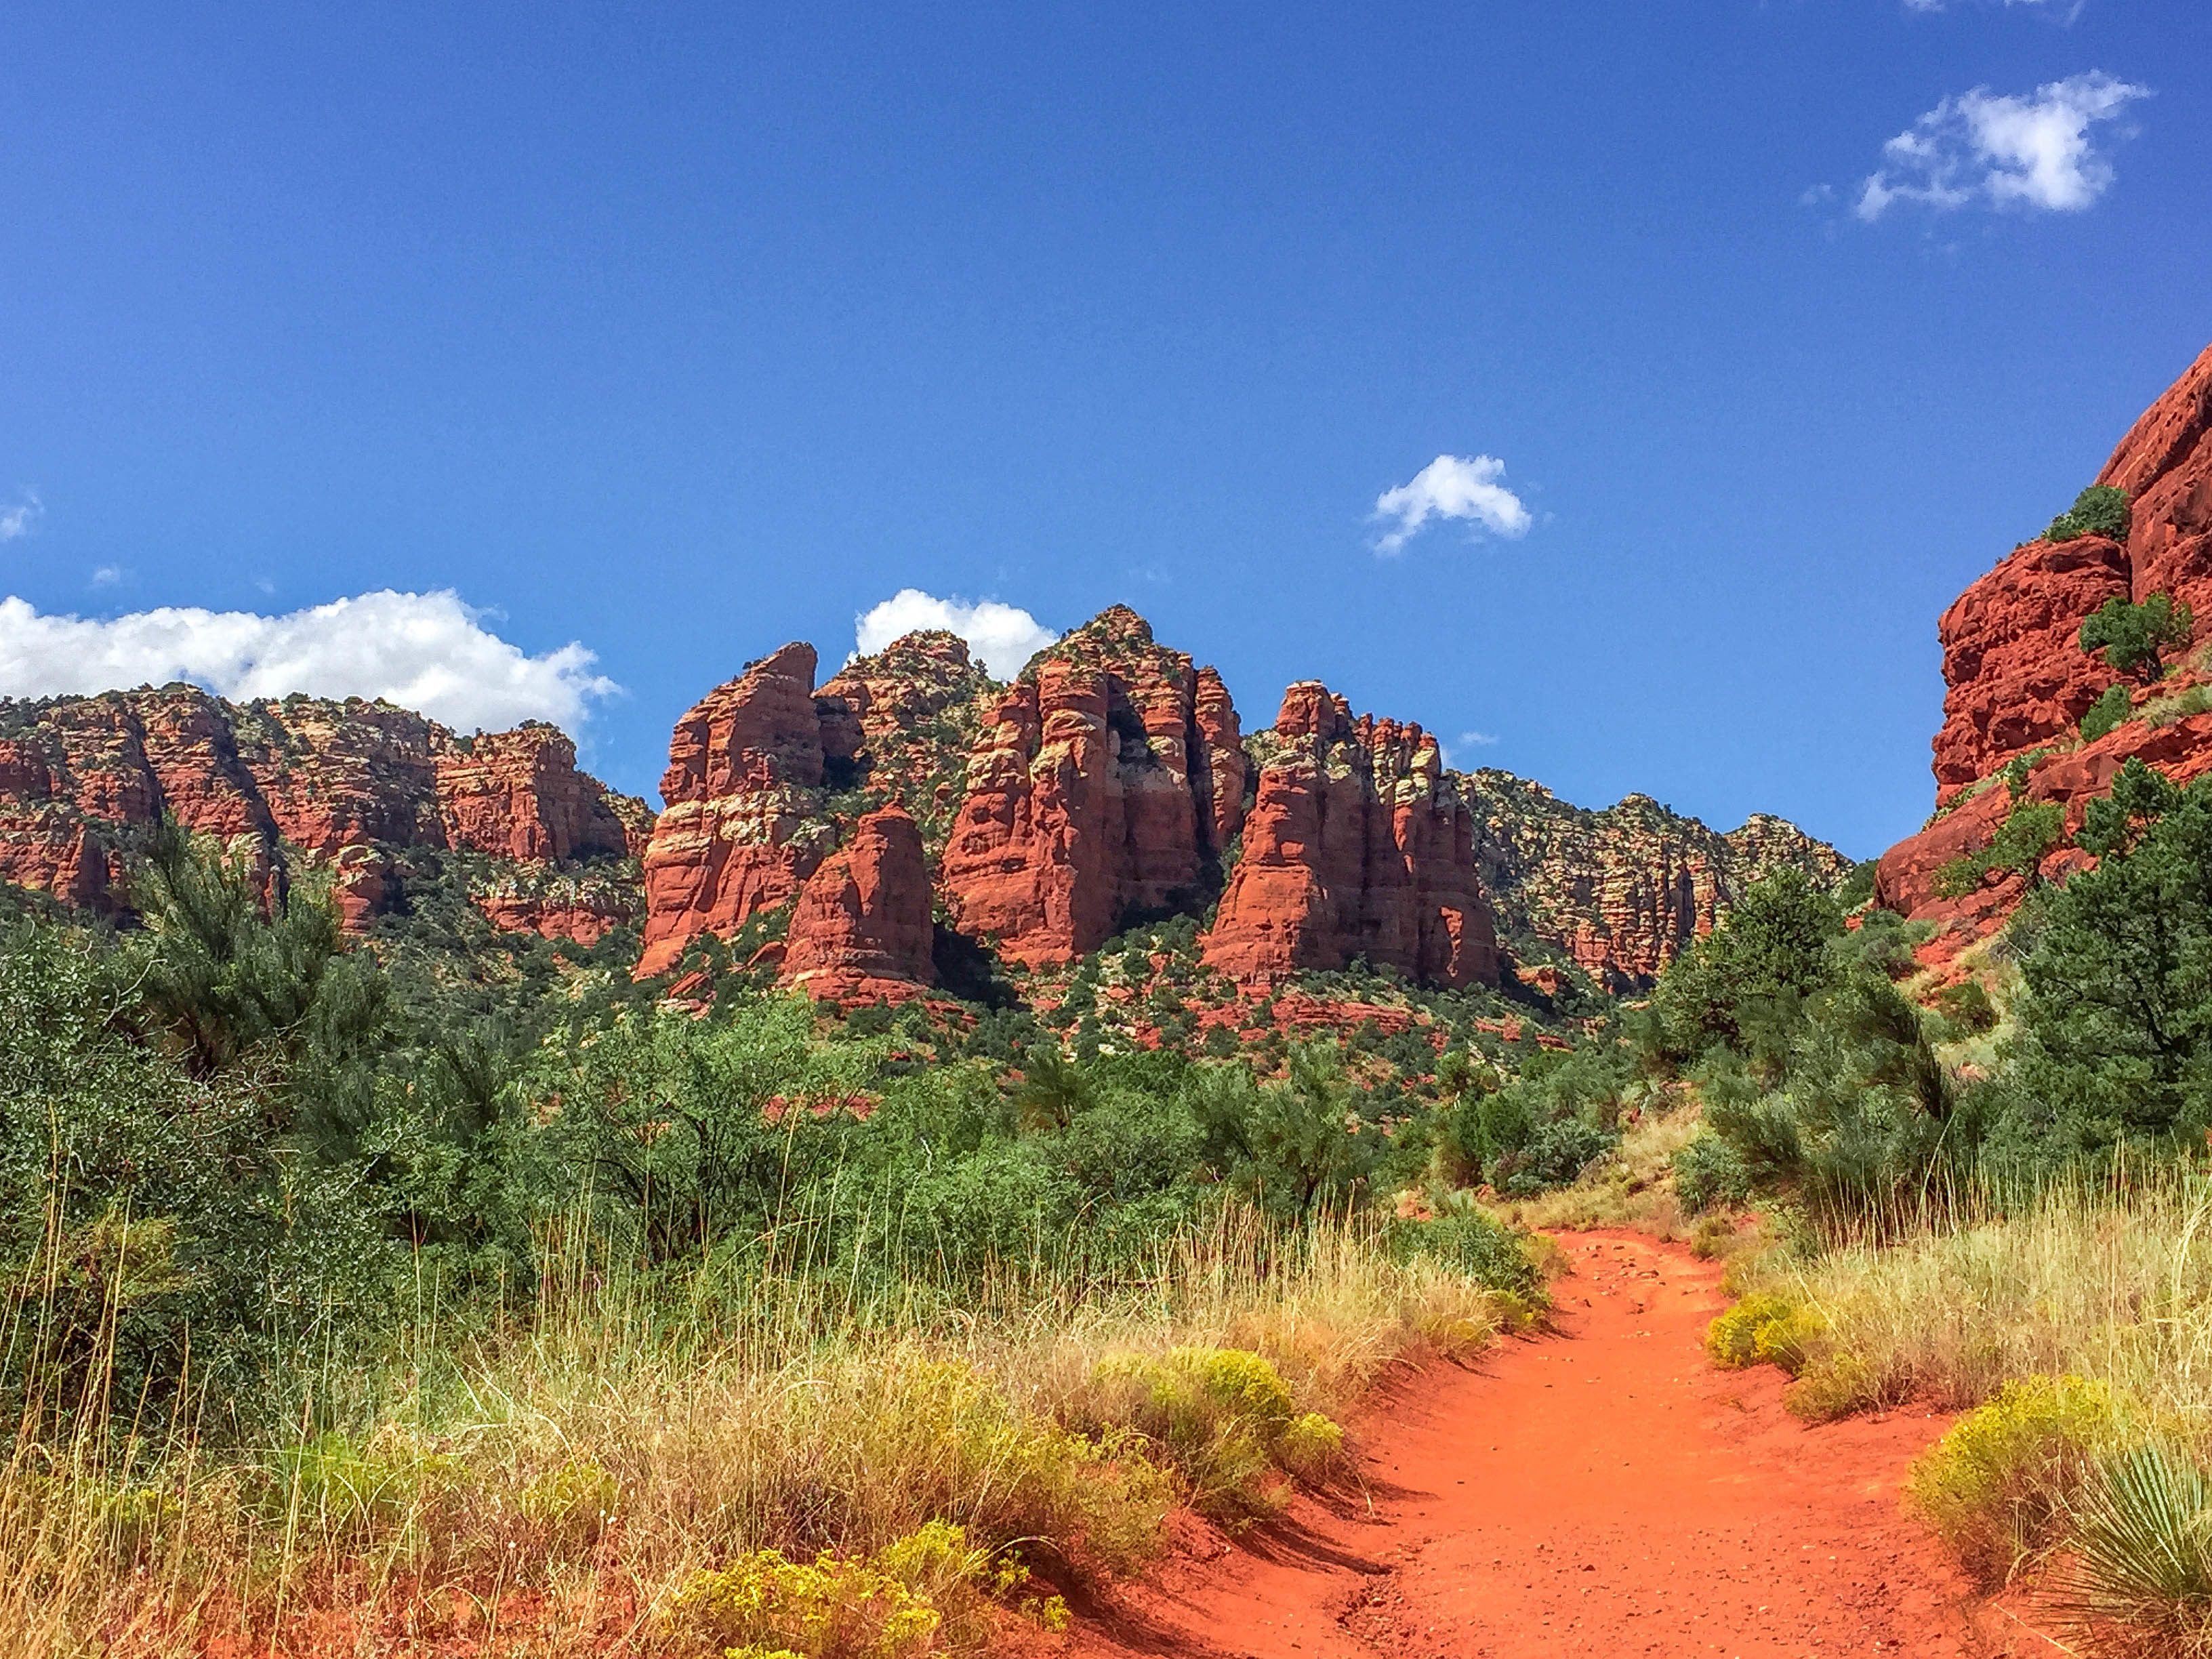 AZ- There Is So Much More Than Just A Desert, and Today: Sedona!